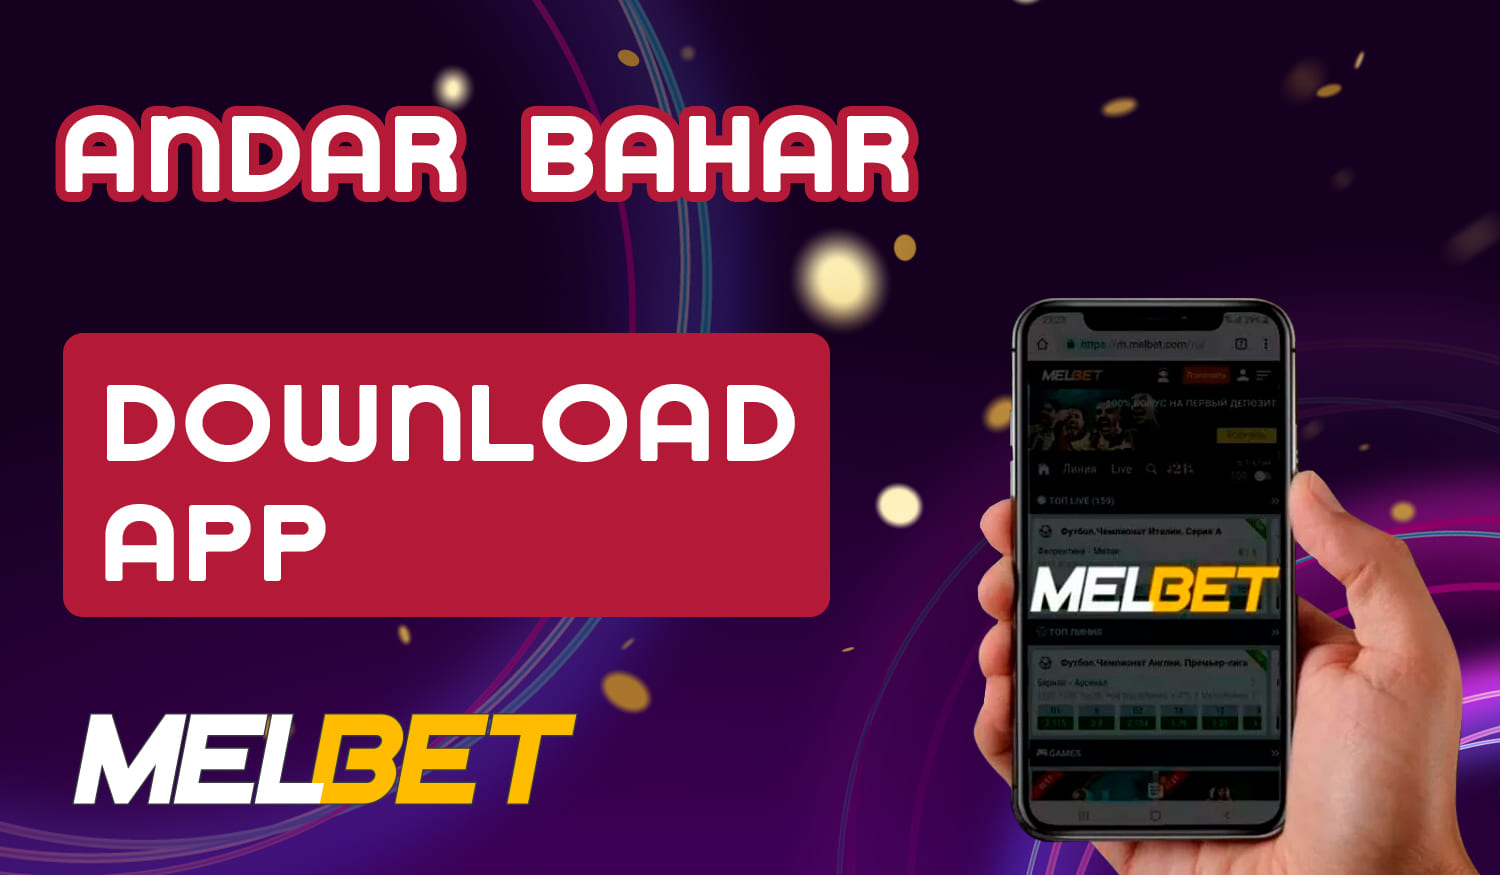 Instructions for downloading and installing Melbet mobile app